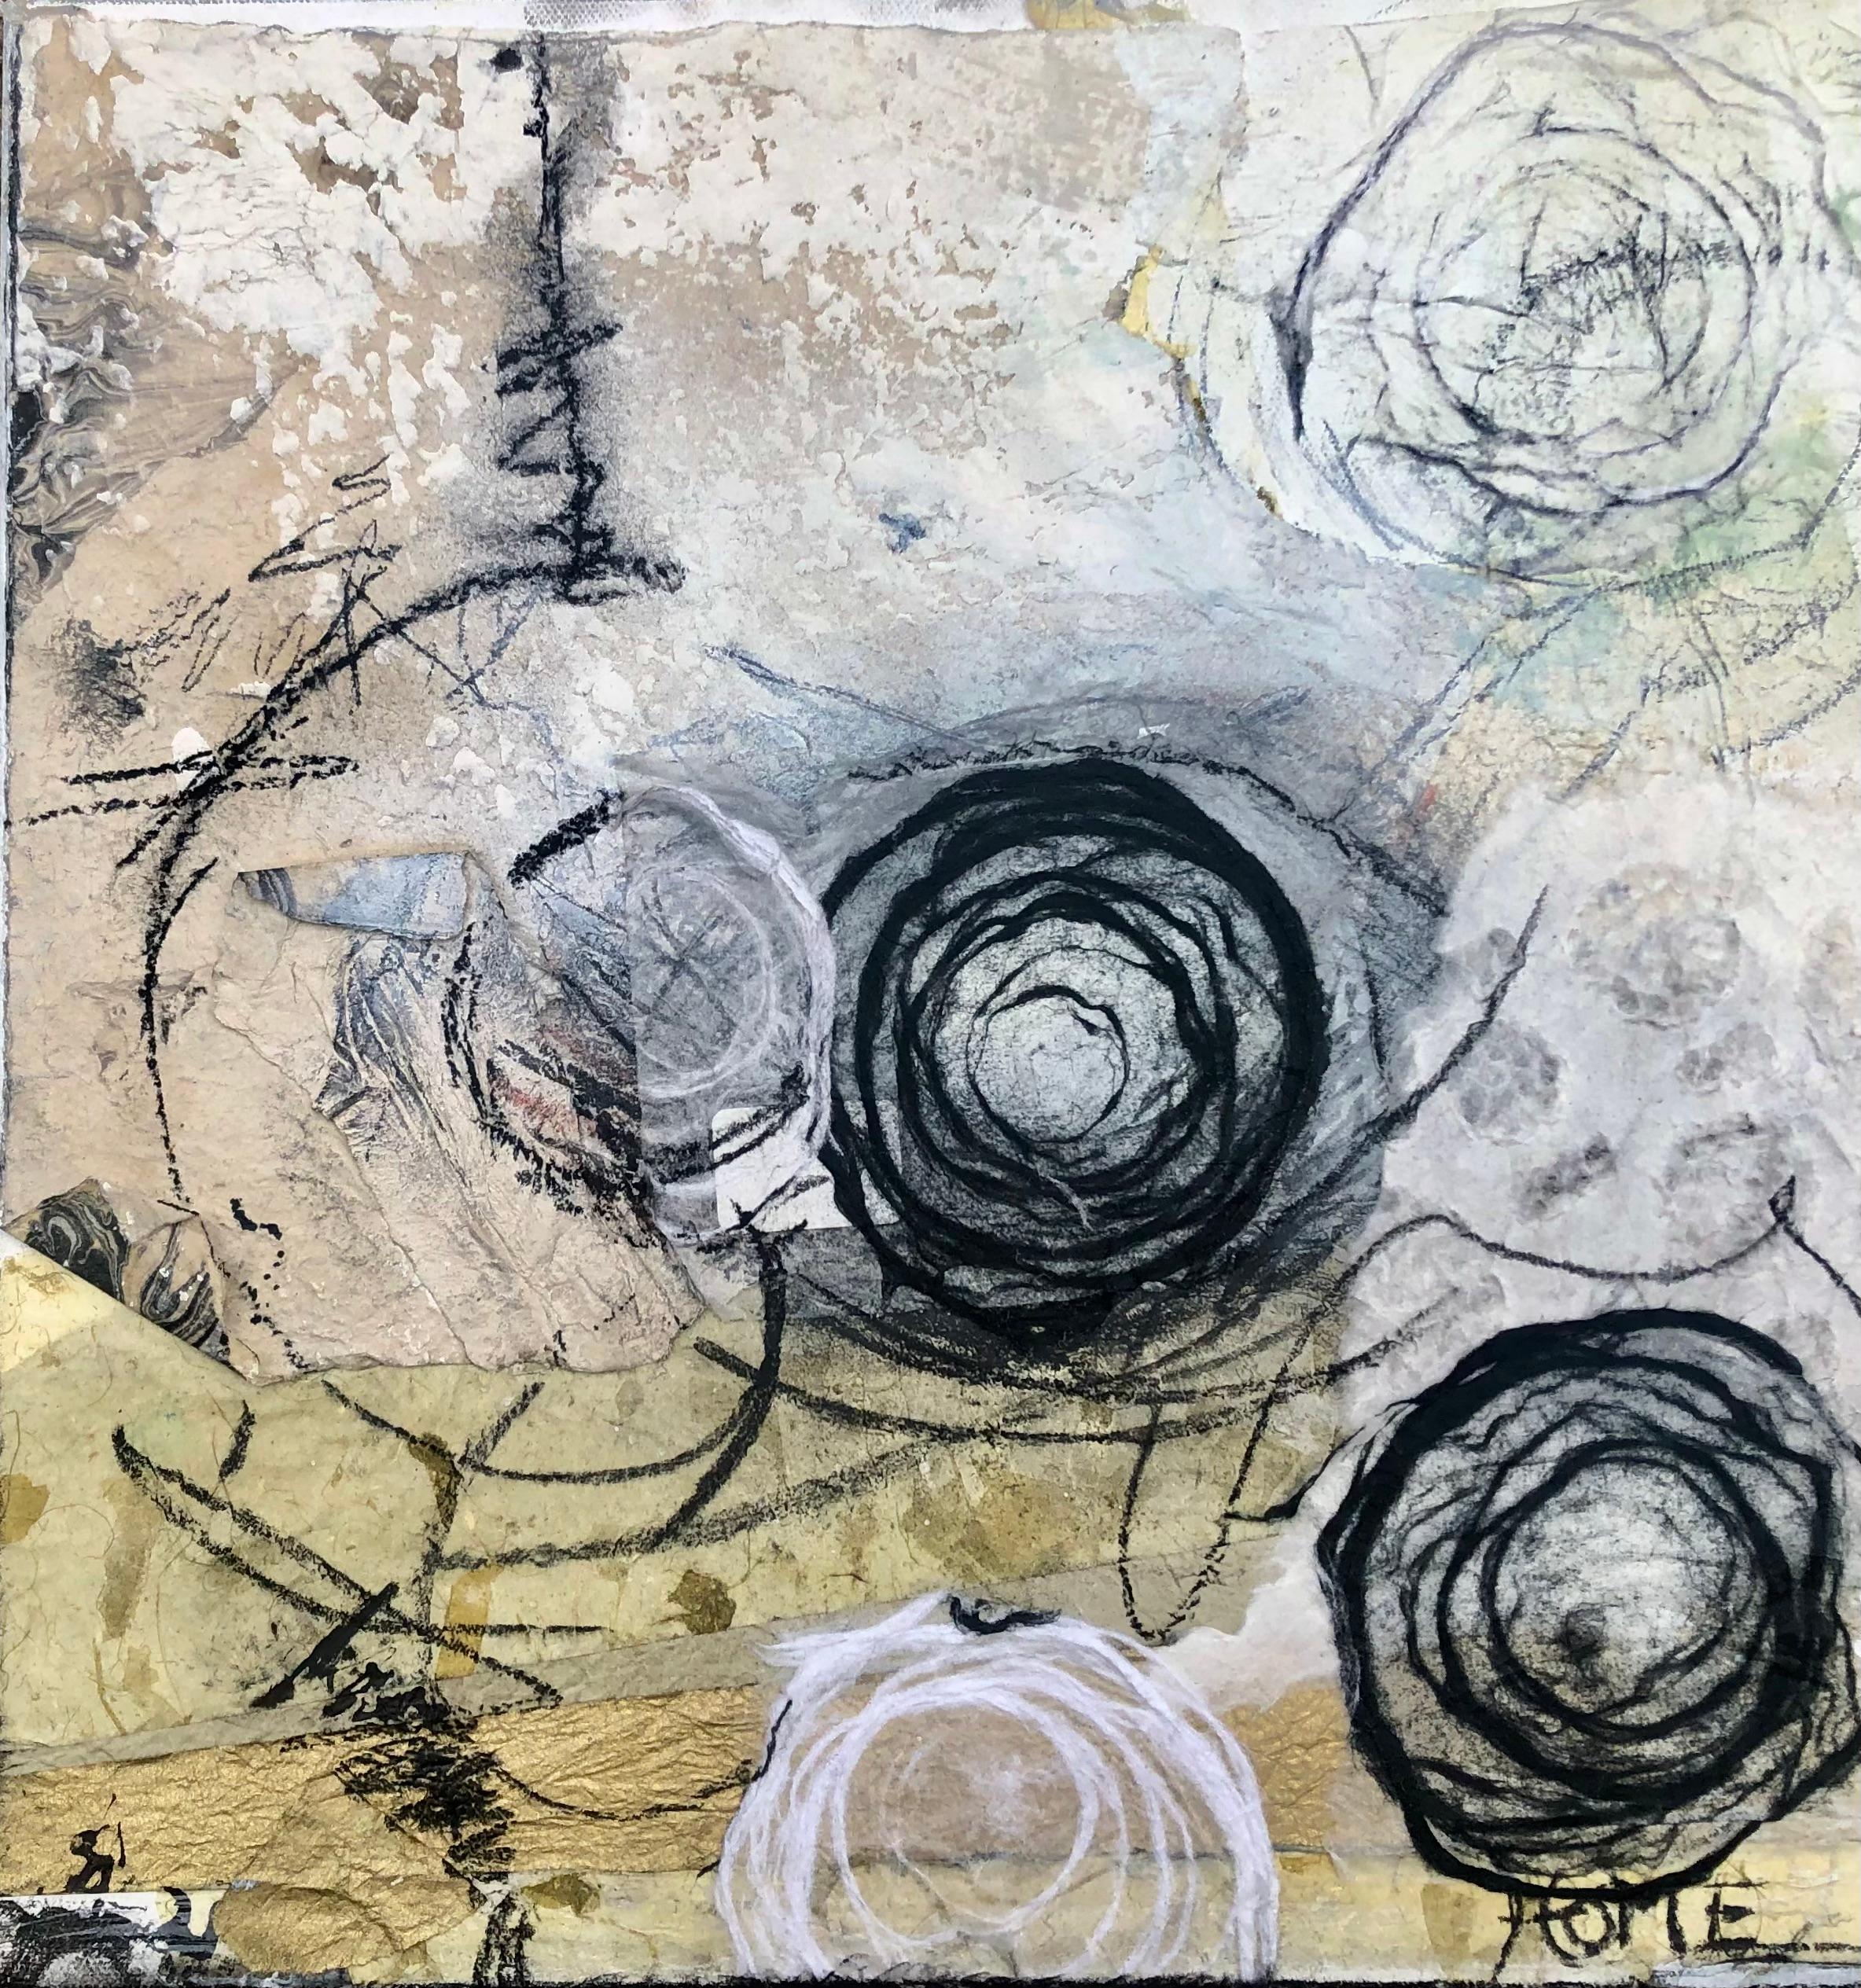 Karol is a highly skilled artist whose abstract mixed-media paintings exude an exceptional level of raw creativity. 
Her artistic process involves skillfully combining colors, chalk paints, and papers to produce captivating works of art. With a